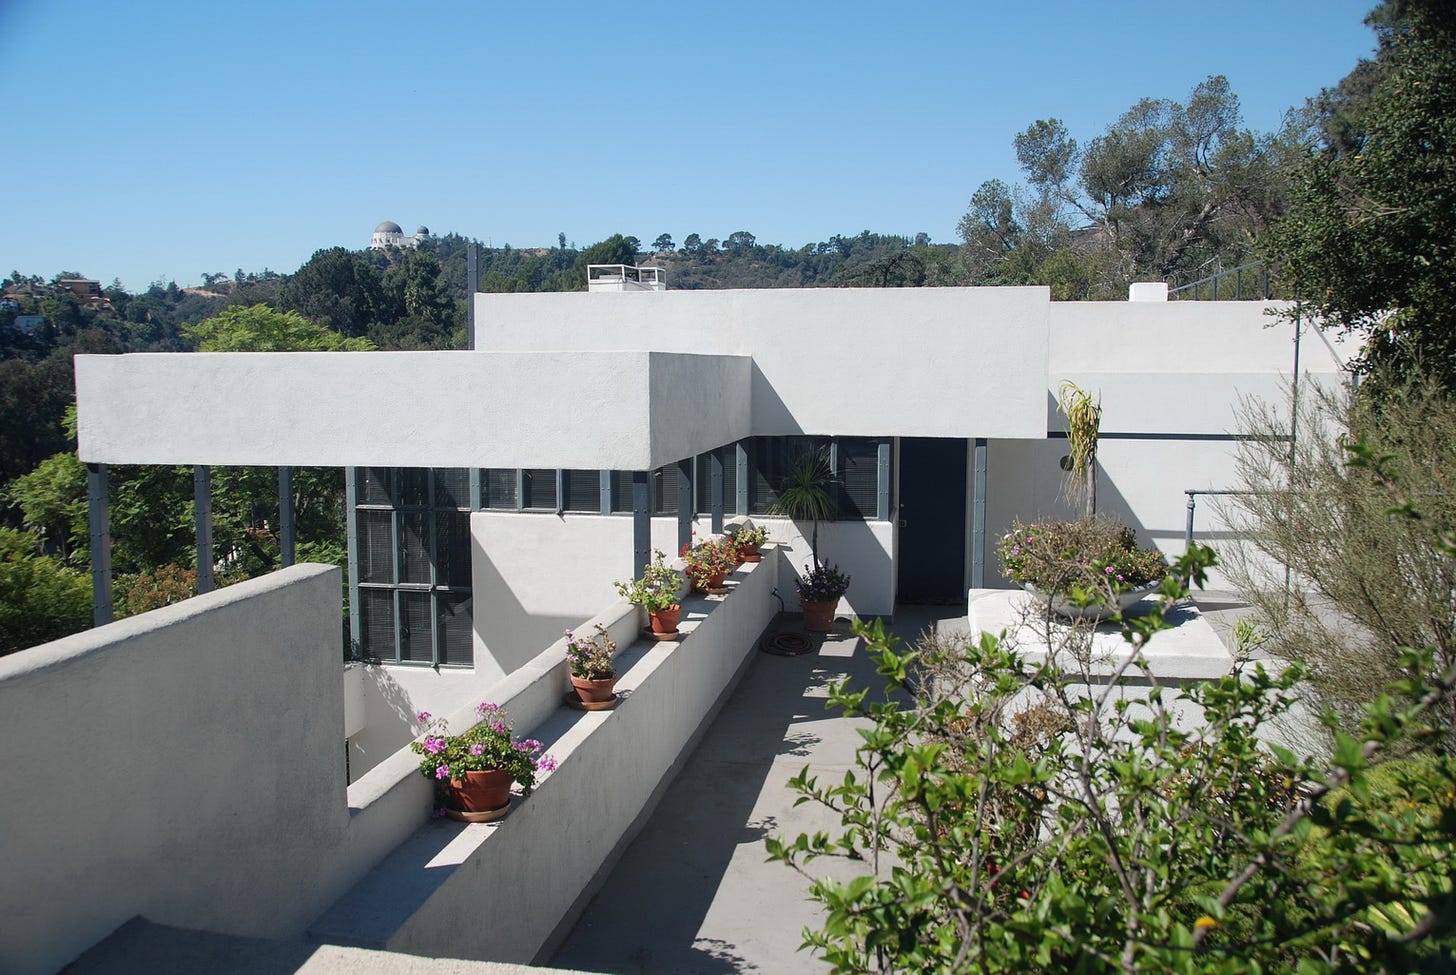 Lovell House, designed by Neutra